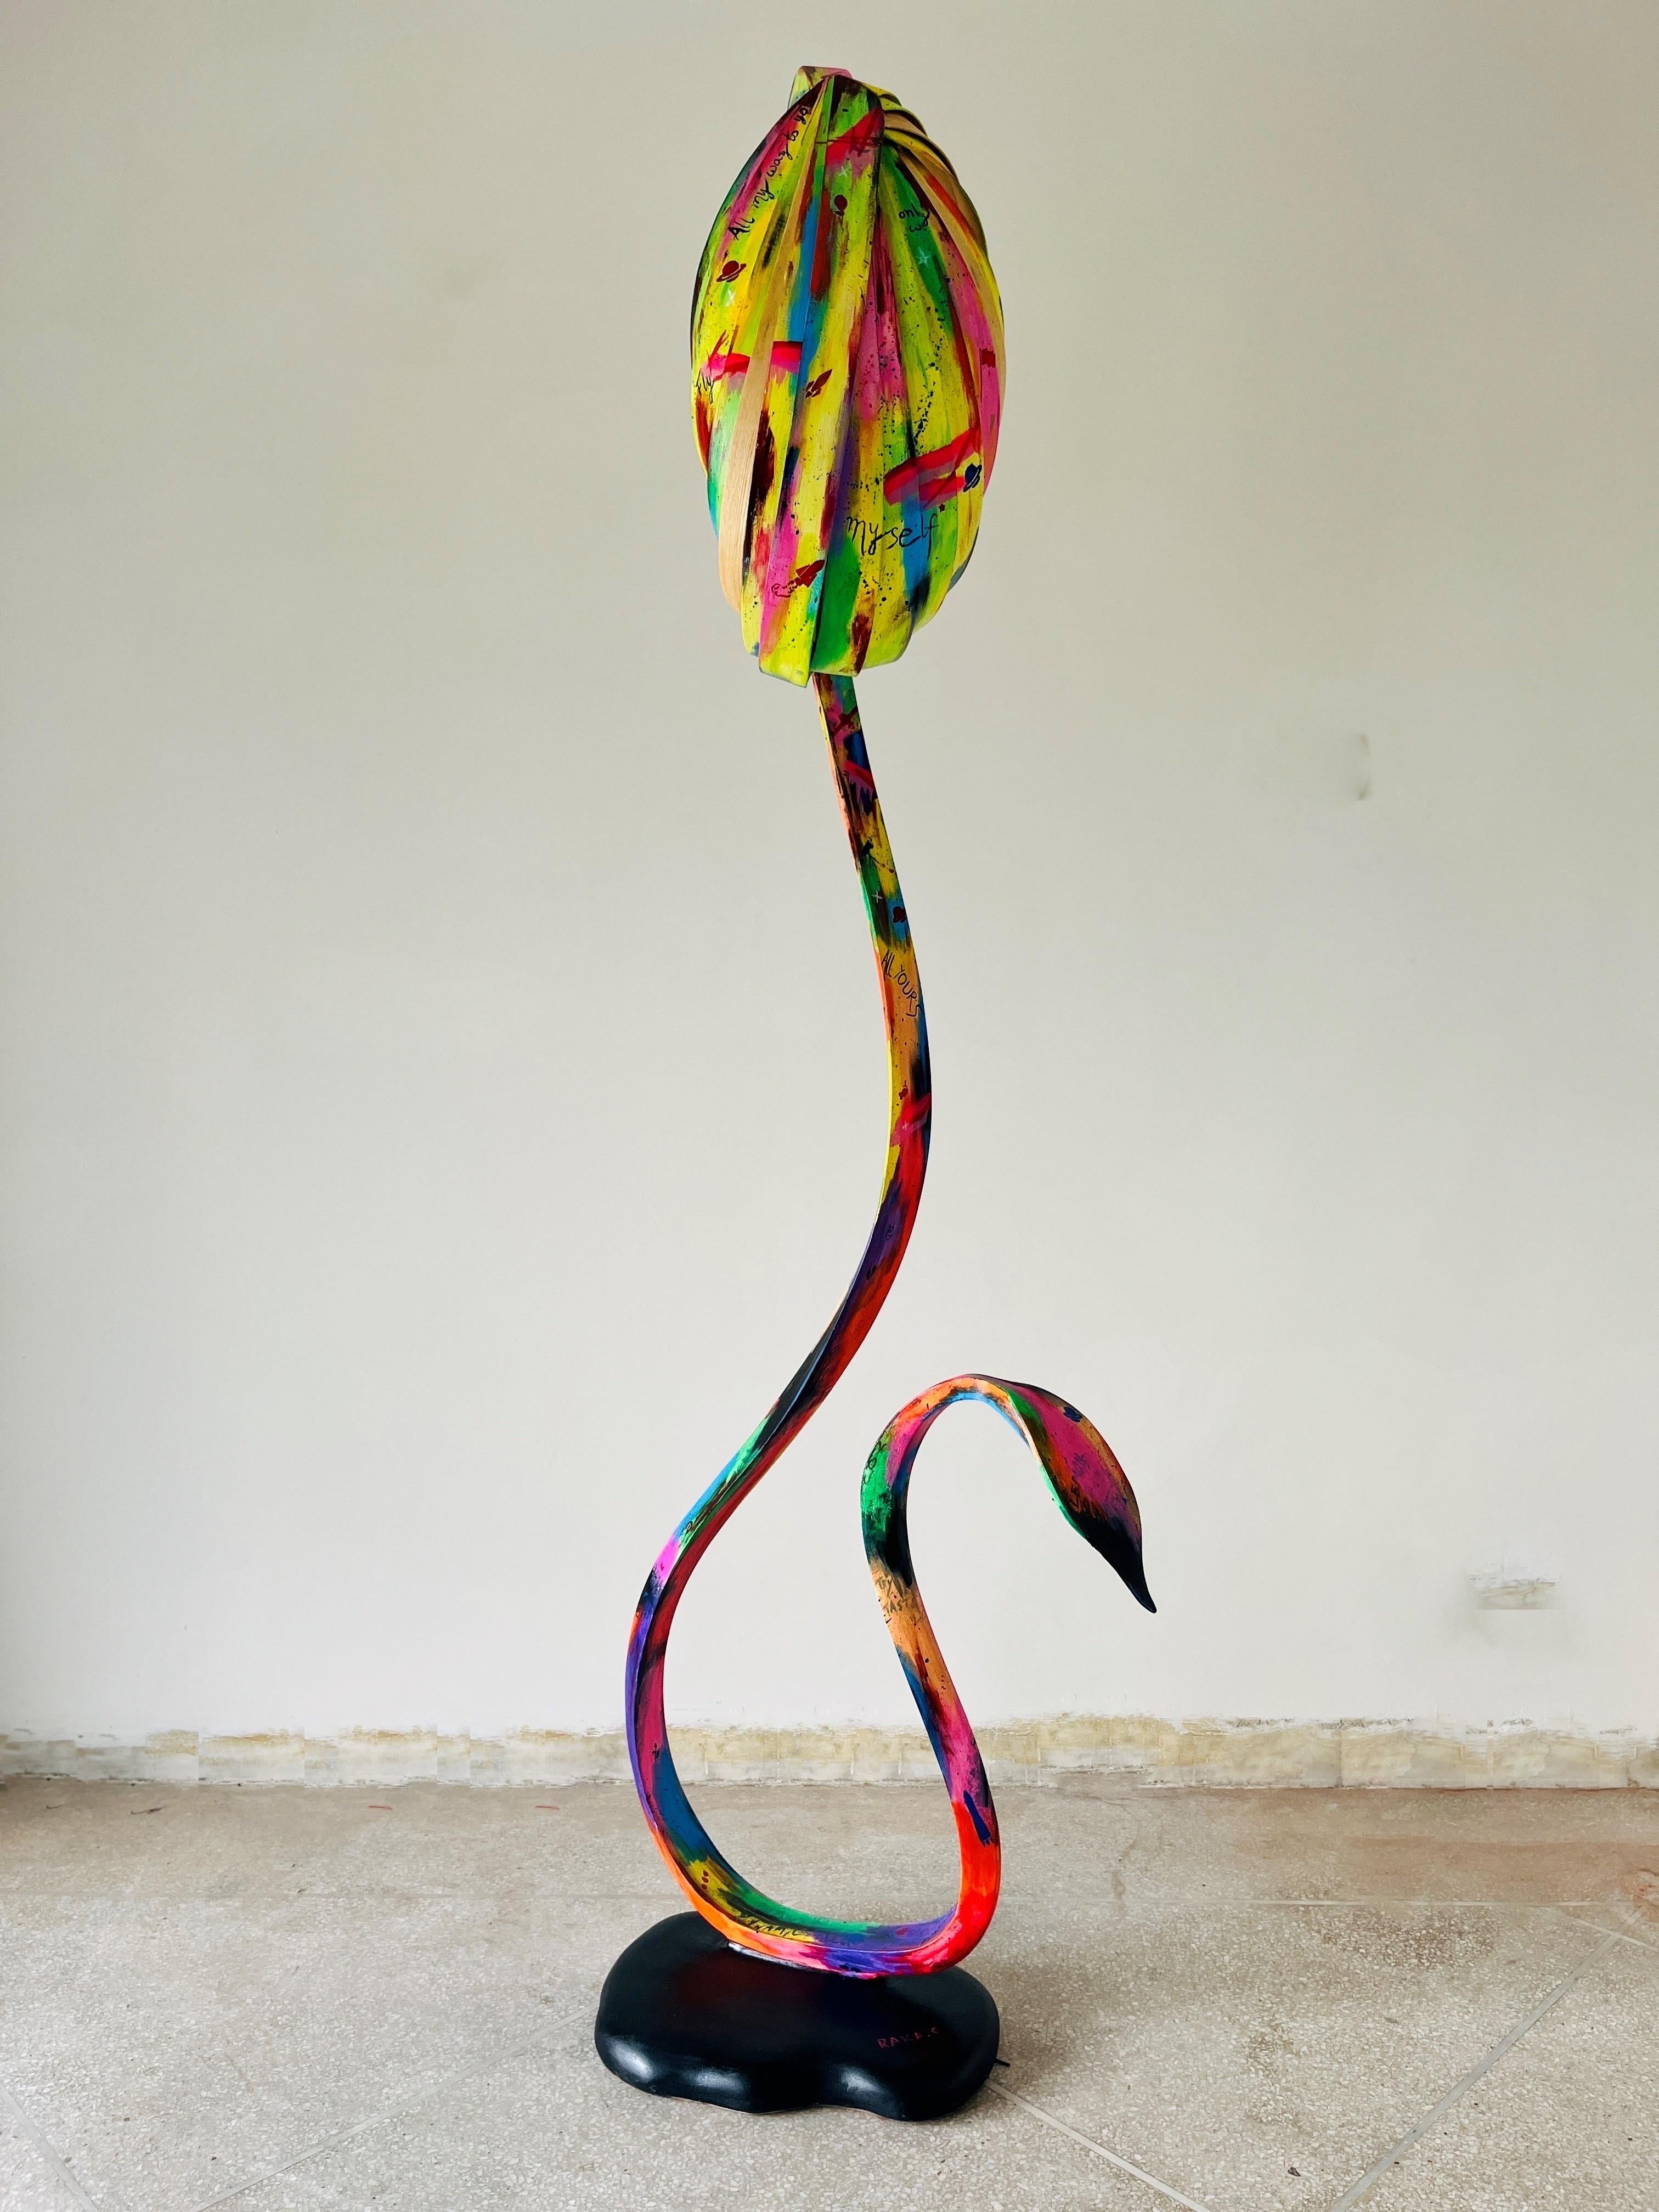 This is the Floor Lamp No. 2 from the Fluentum Series. A collaboration between the Studio and Hamza Khan Sherwani, a Pakistan based artist.

The piece is an arc lamp which has been presented as an abstraction of a vine plant. Thin strips of wood